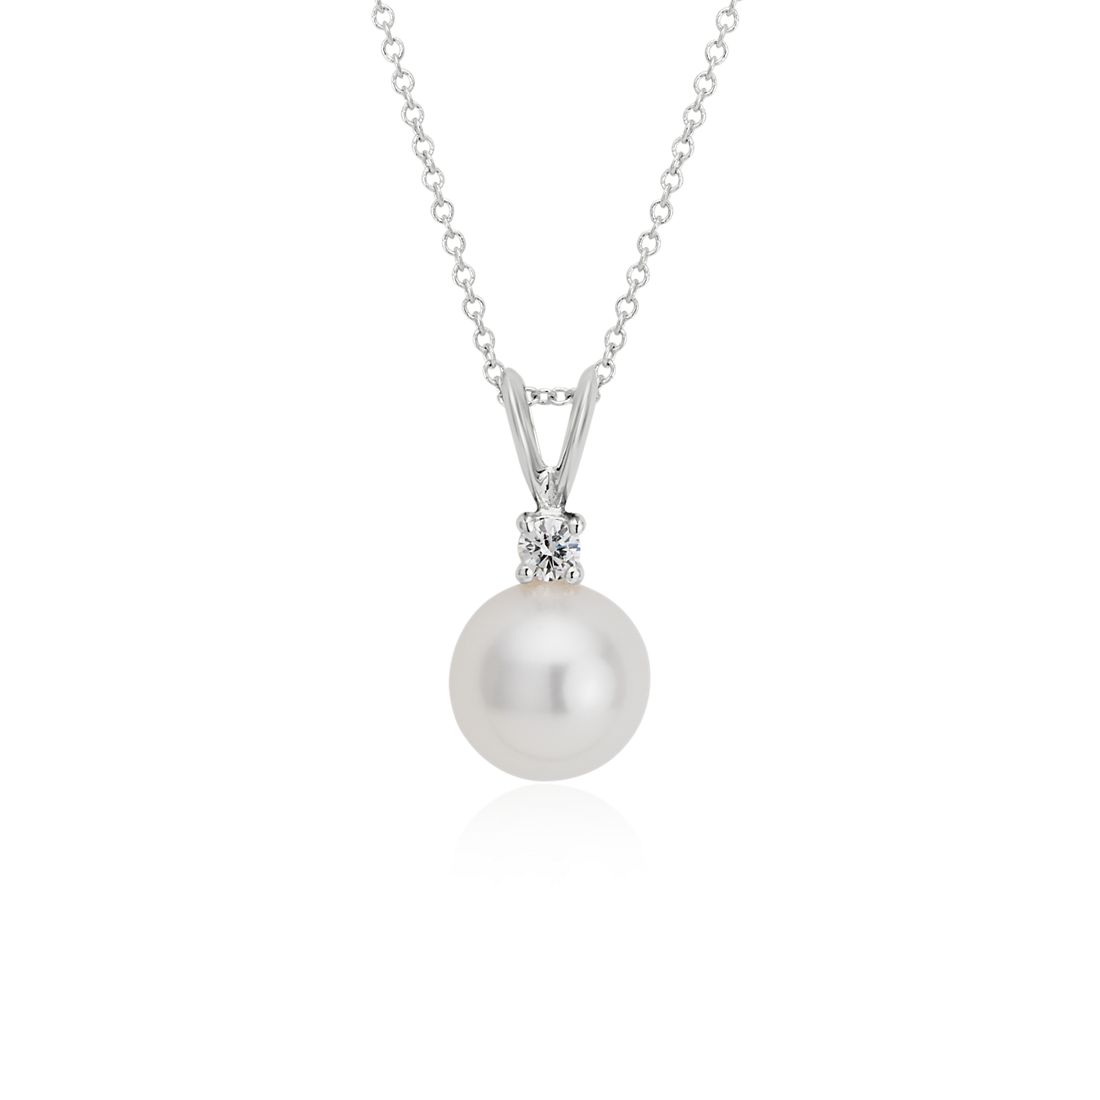 South Sea Cultured Pearl and Diamond Pendant in 18k White Gold (9.0-9.5mm)